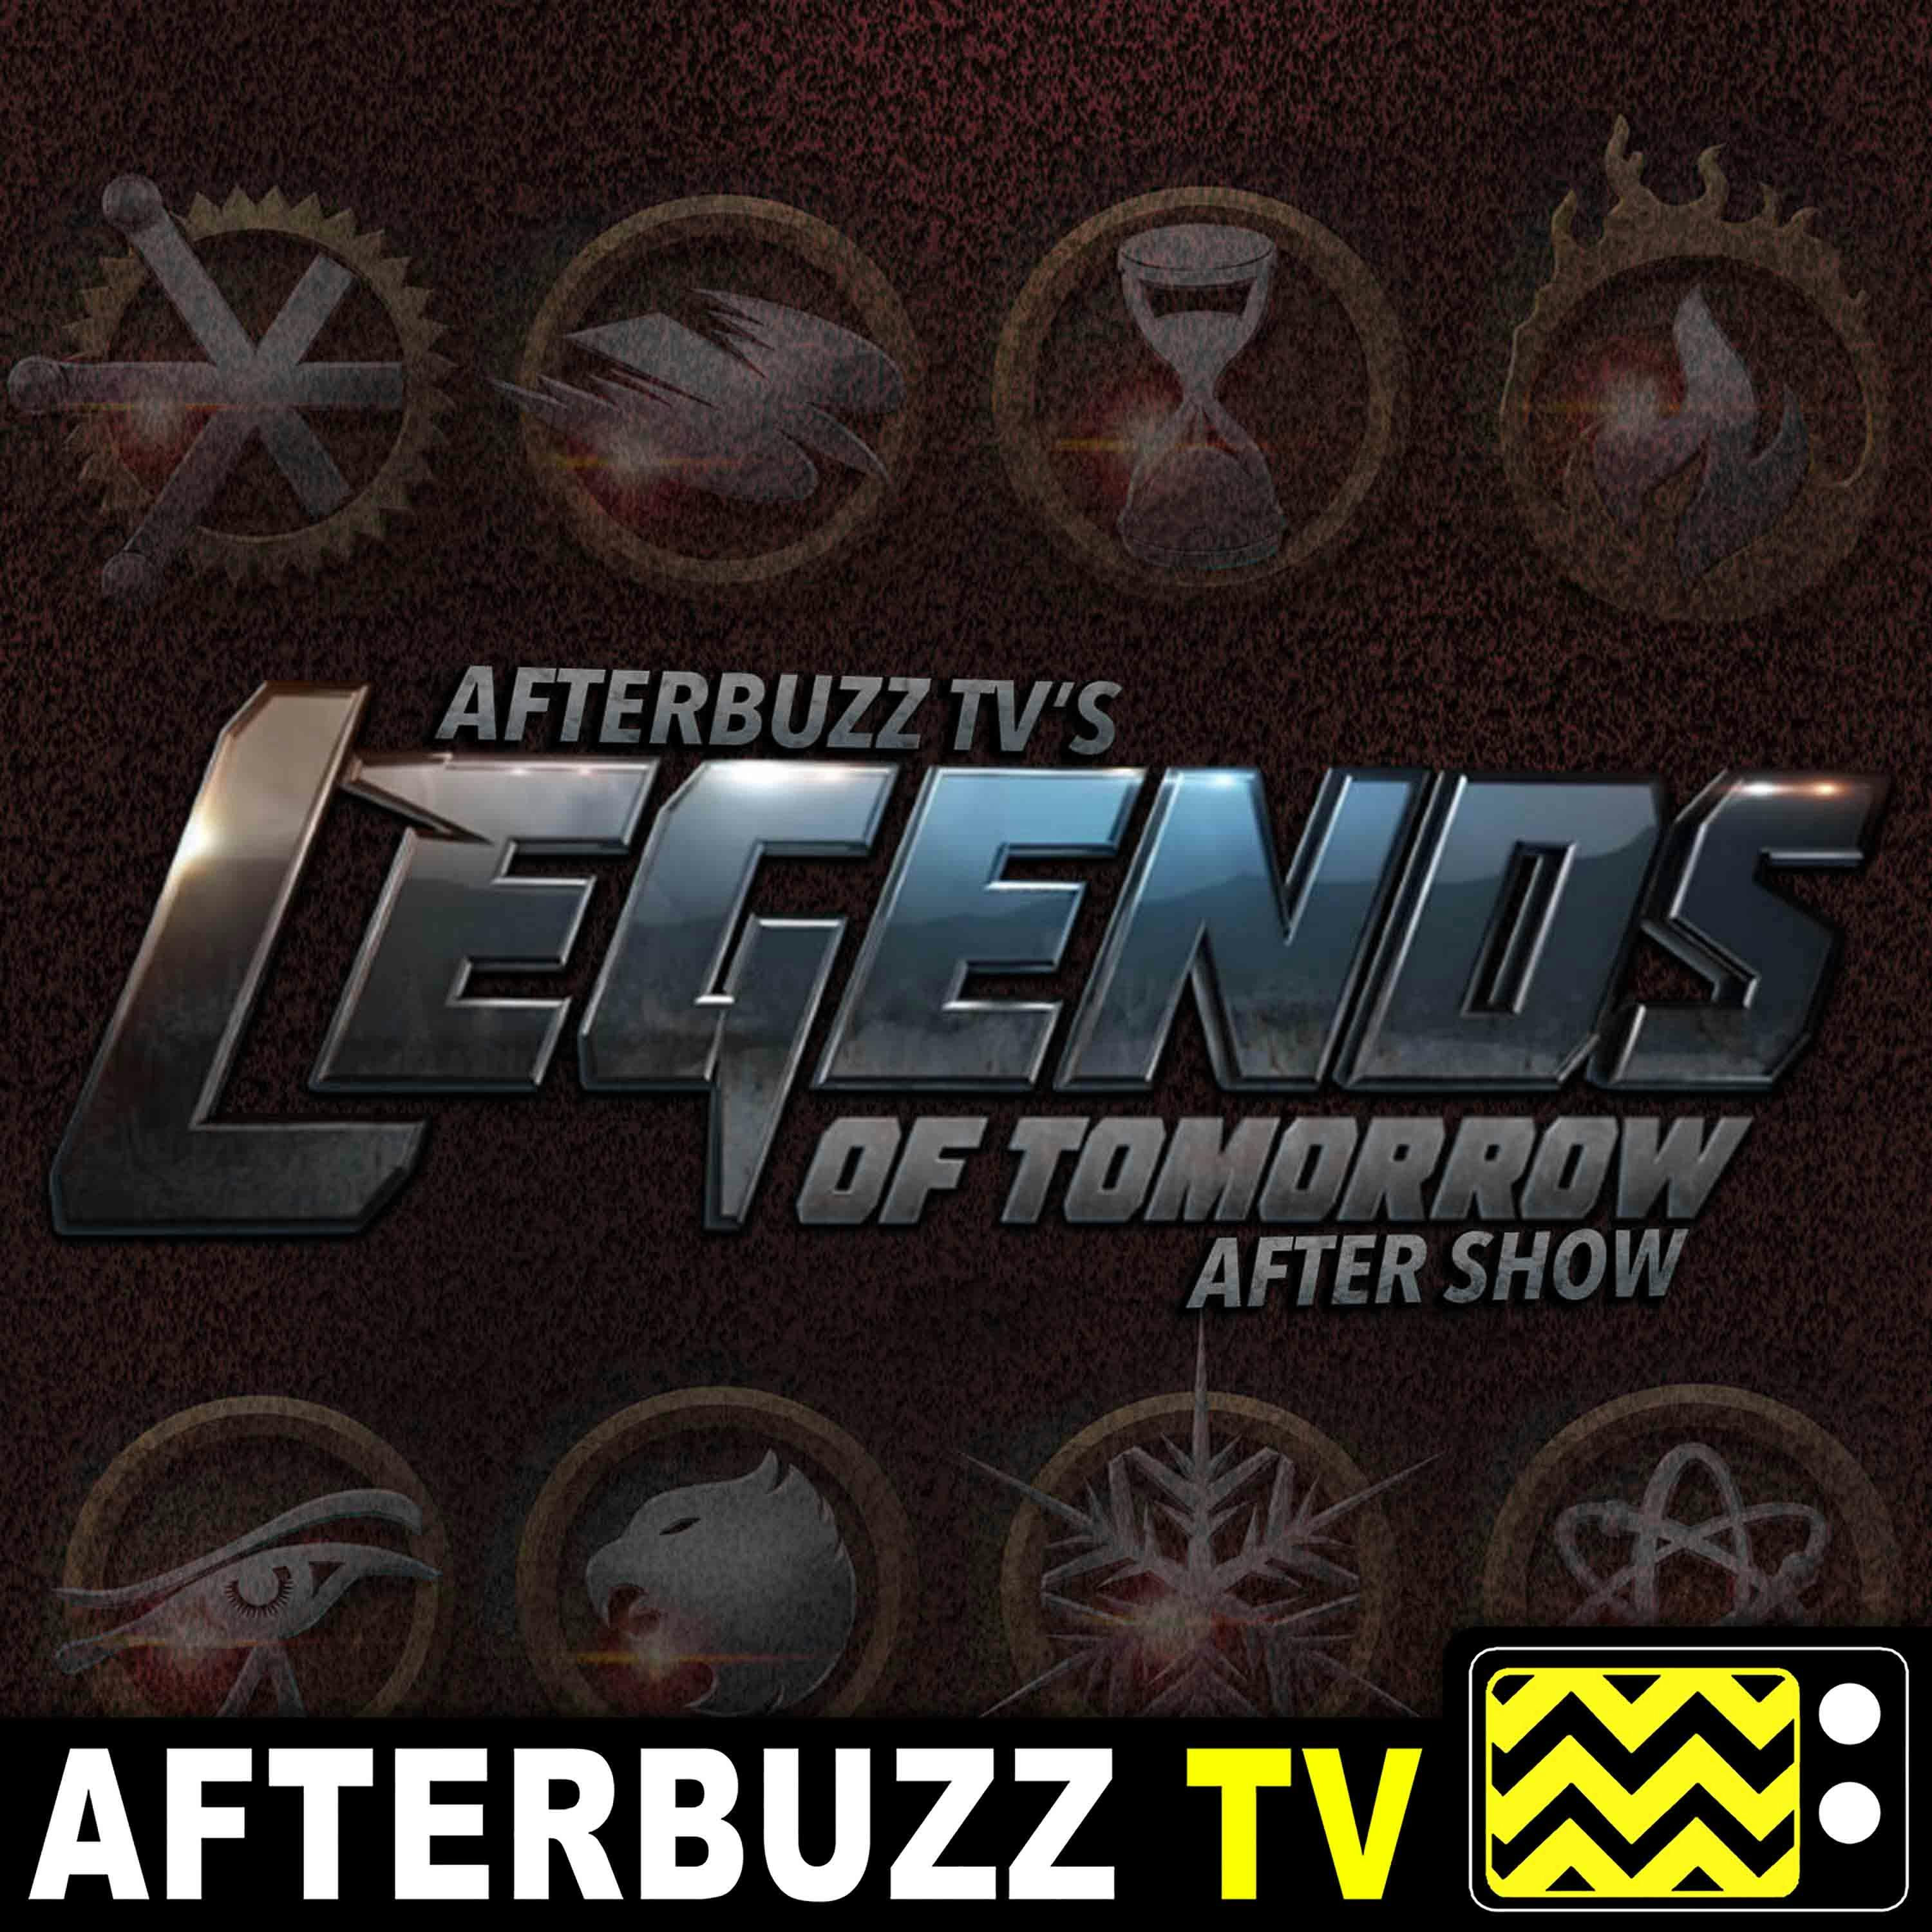 Legends Of Tomorrow S:3 | Necromancing the Stone E:15 | AfterBuzz TV AfterShow